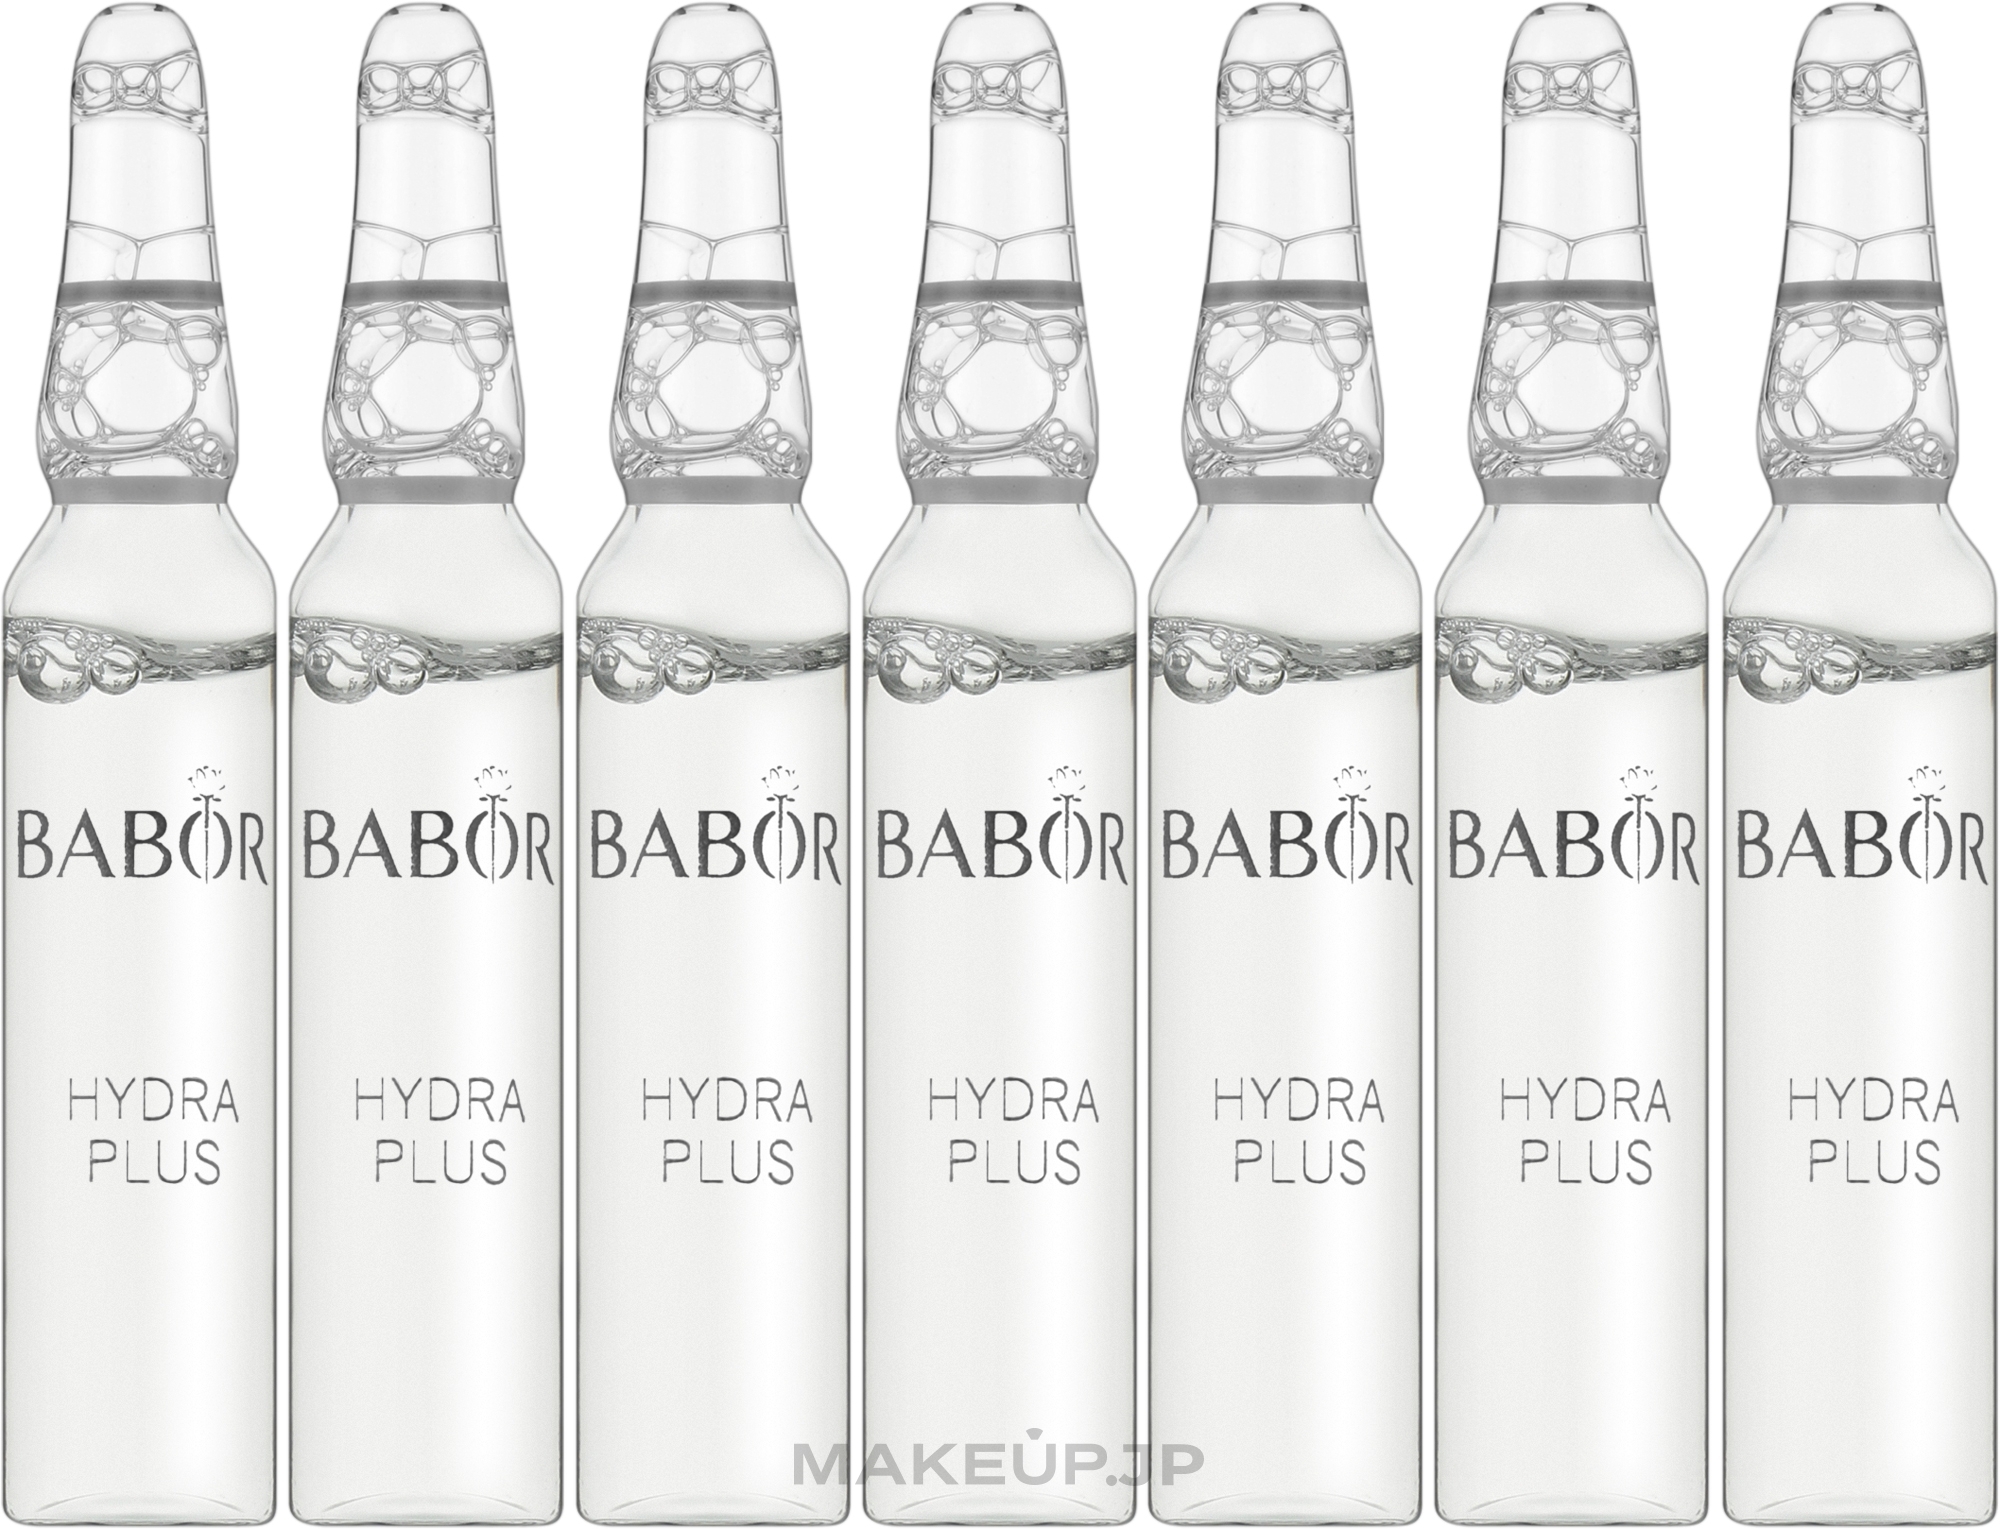 Moisturizing Ampoules for Dry & Damaged Skin - Babor Ampoule Concentrates Hydra Plus — photo 7 x 2 ml